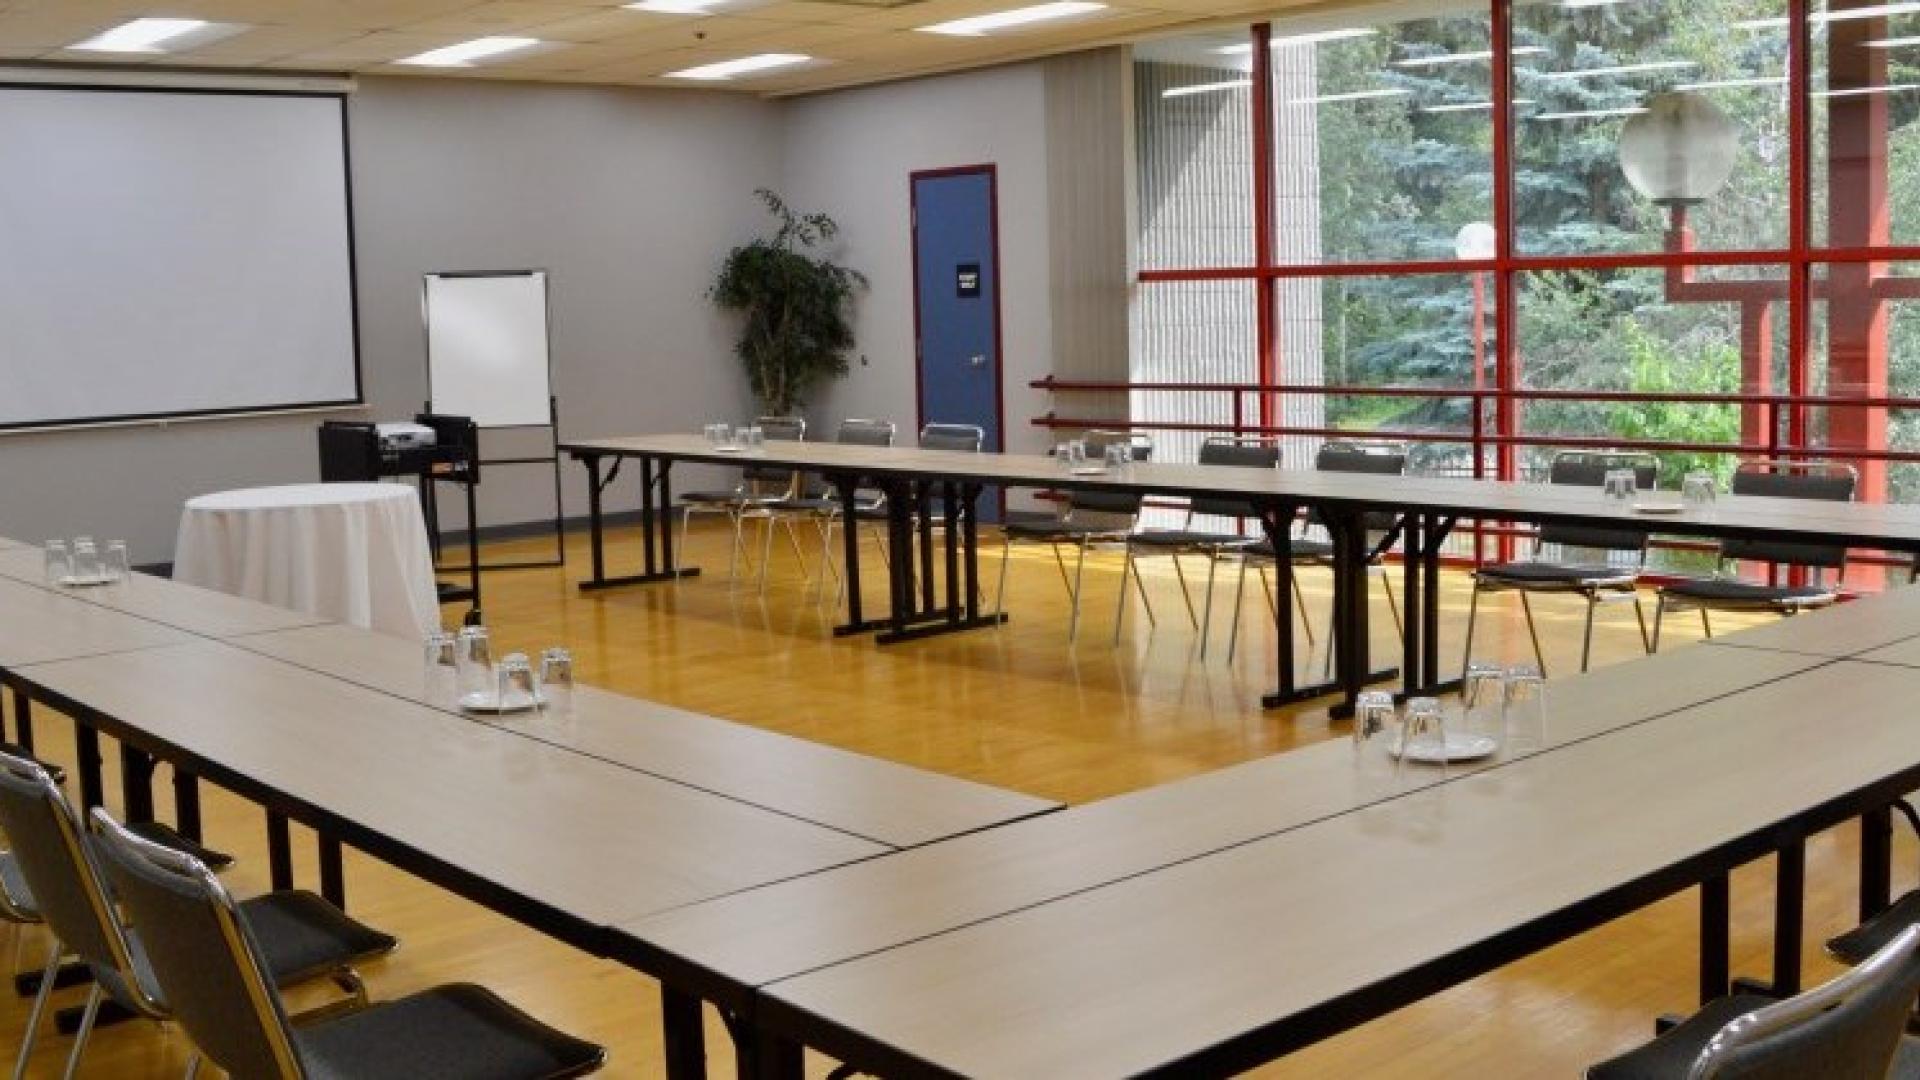 Meeting room with desks and chairs in a circle around a projector screen